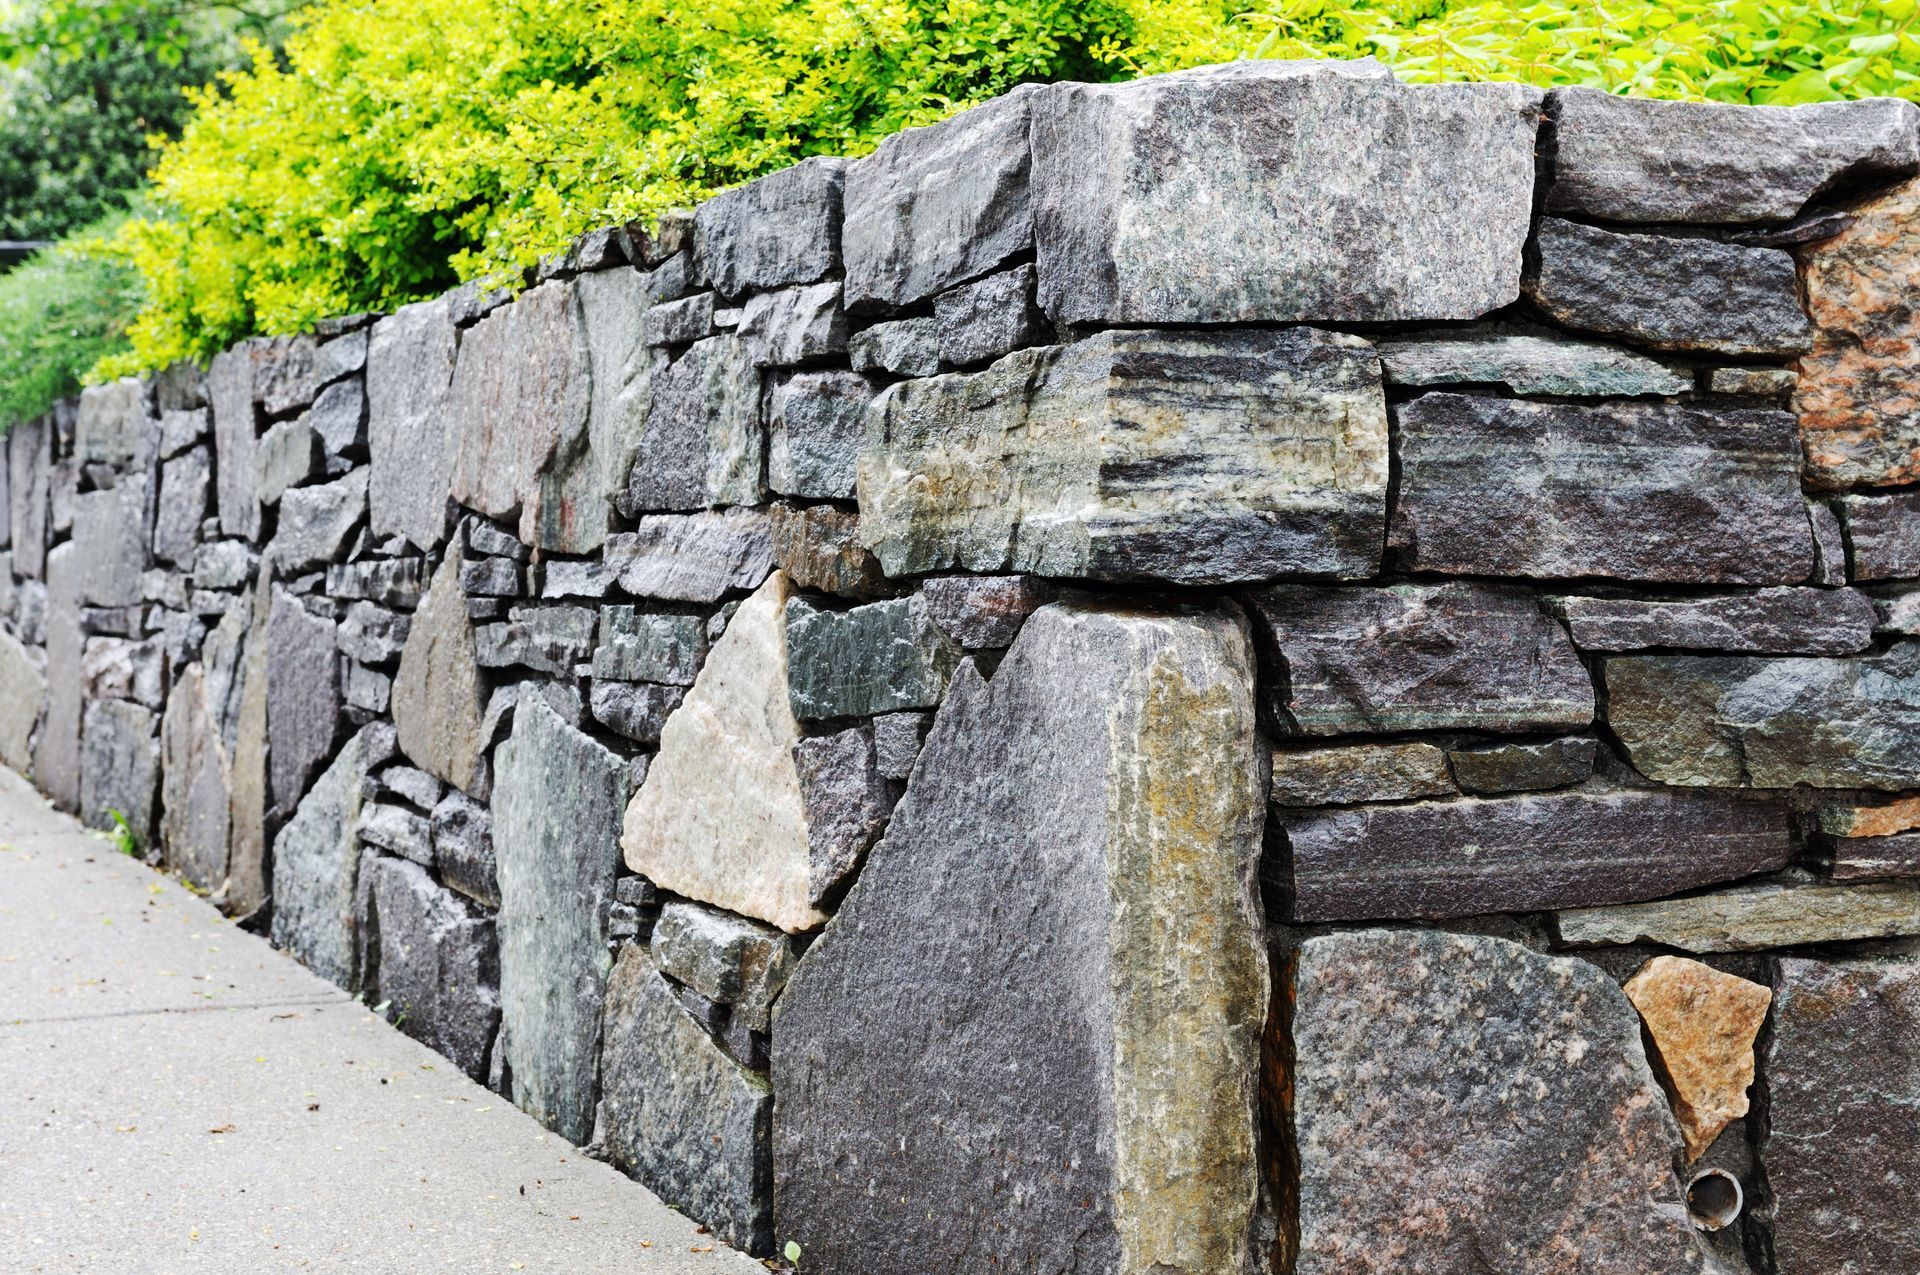 Closeup of dry stone wall built with natural flagstones and wallstones of irregular shapes and sizes